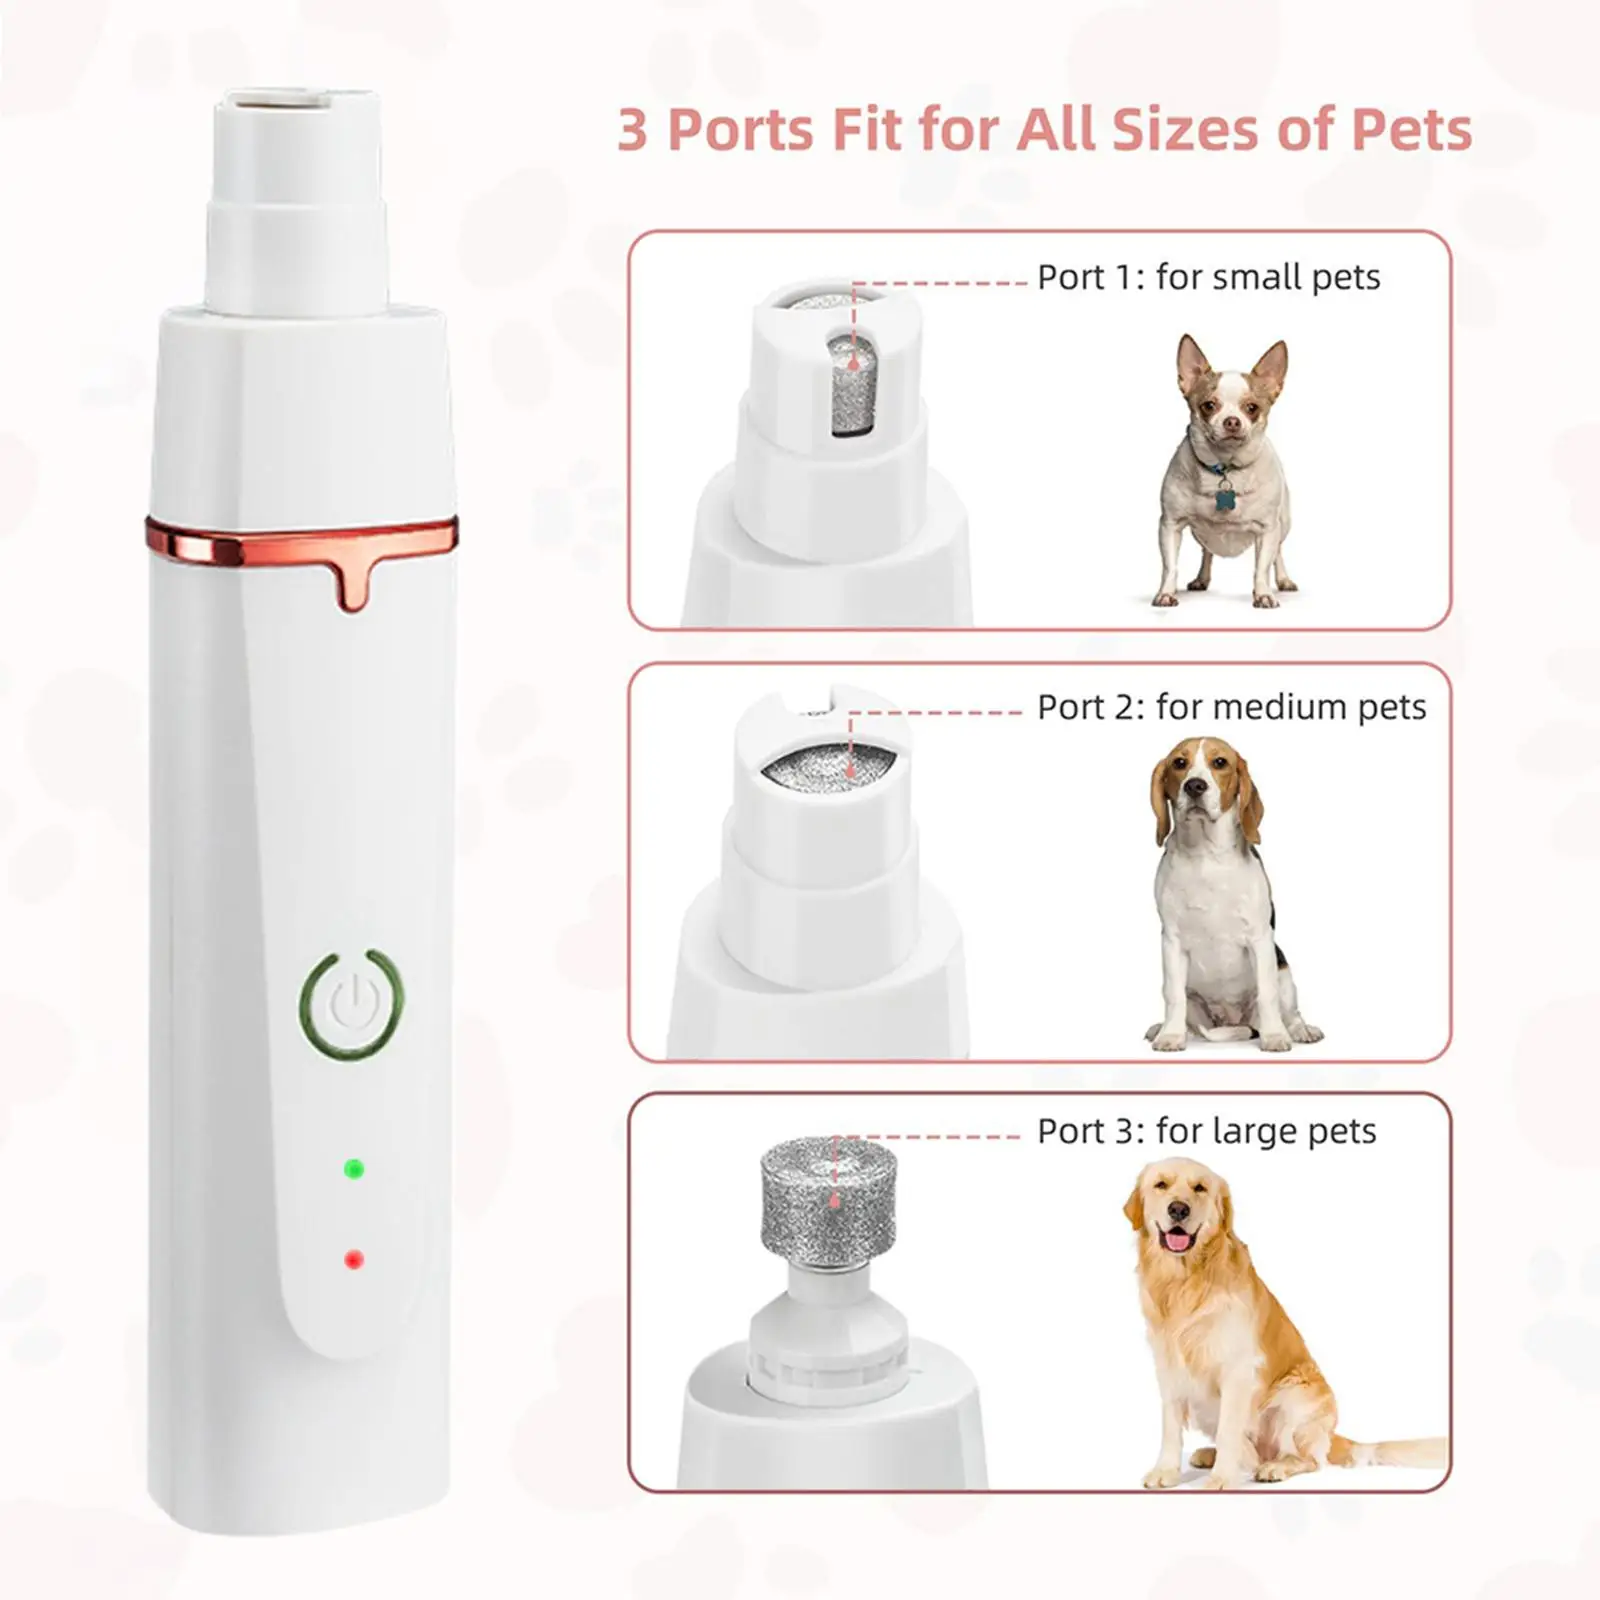 4 in 1 Pet Dog Grooming Kit Quiet USB Hair Clippers Trimmers for Dogs Cat Pet`S Hair Around Eyes, Ears, Face, Rump Grinding Paws